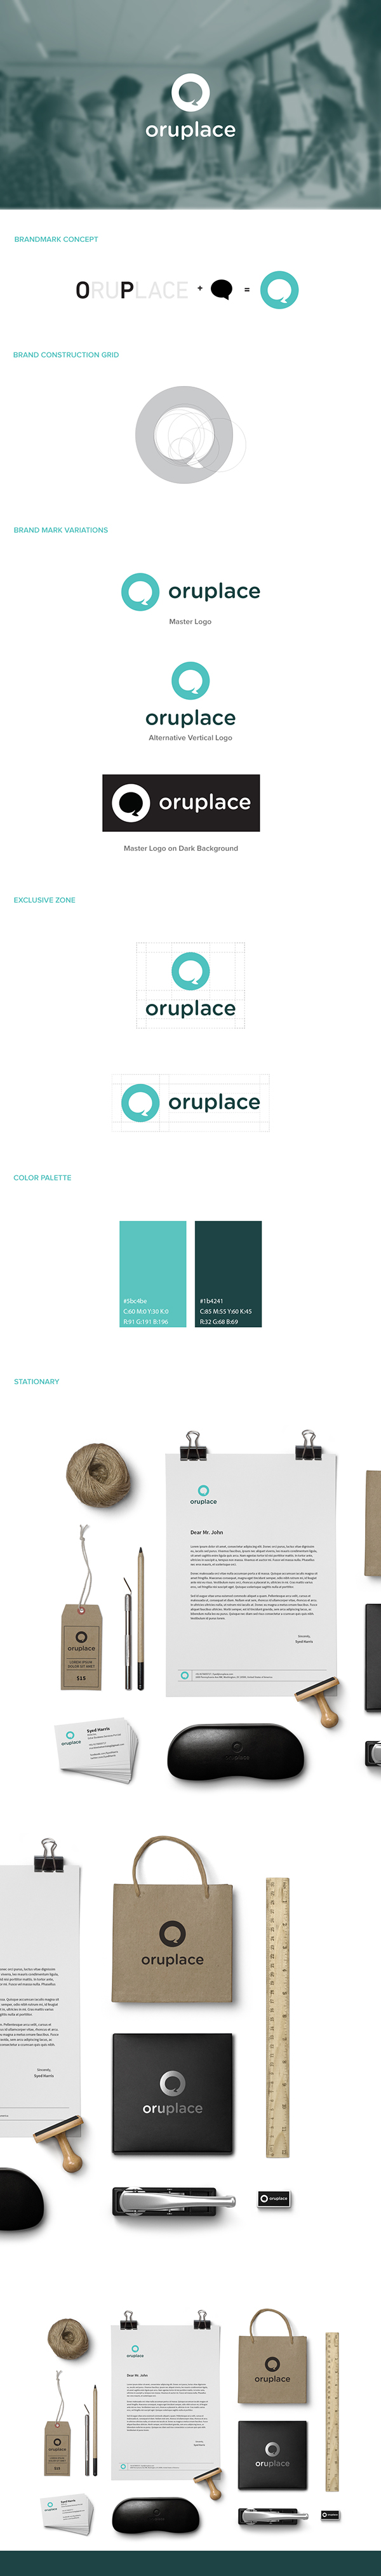 Oruplace Branding and Guidelines